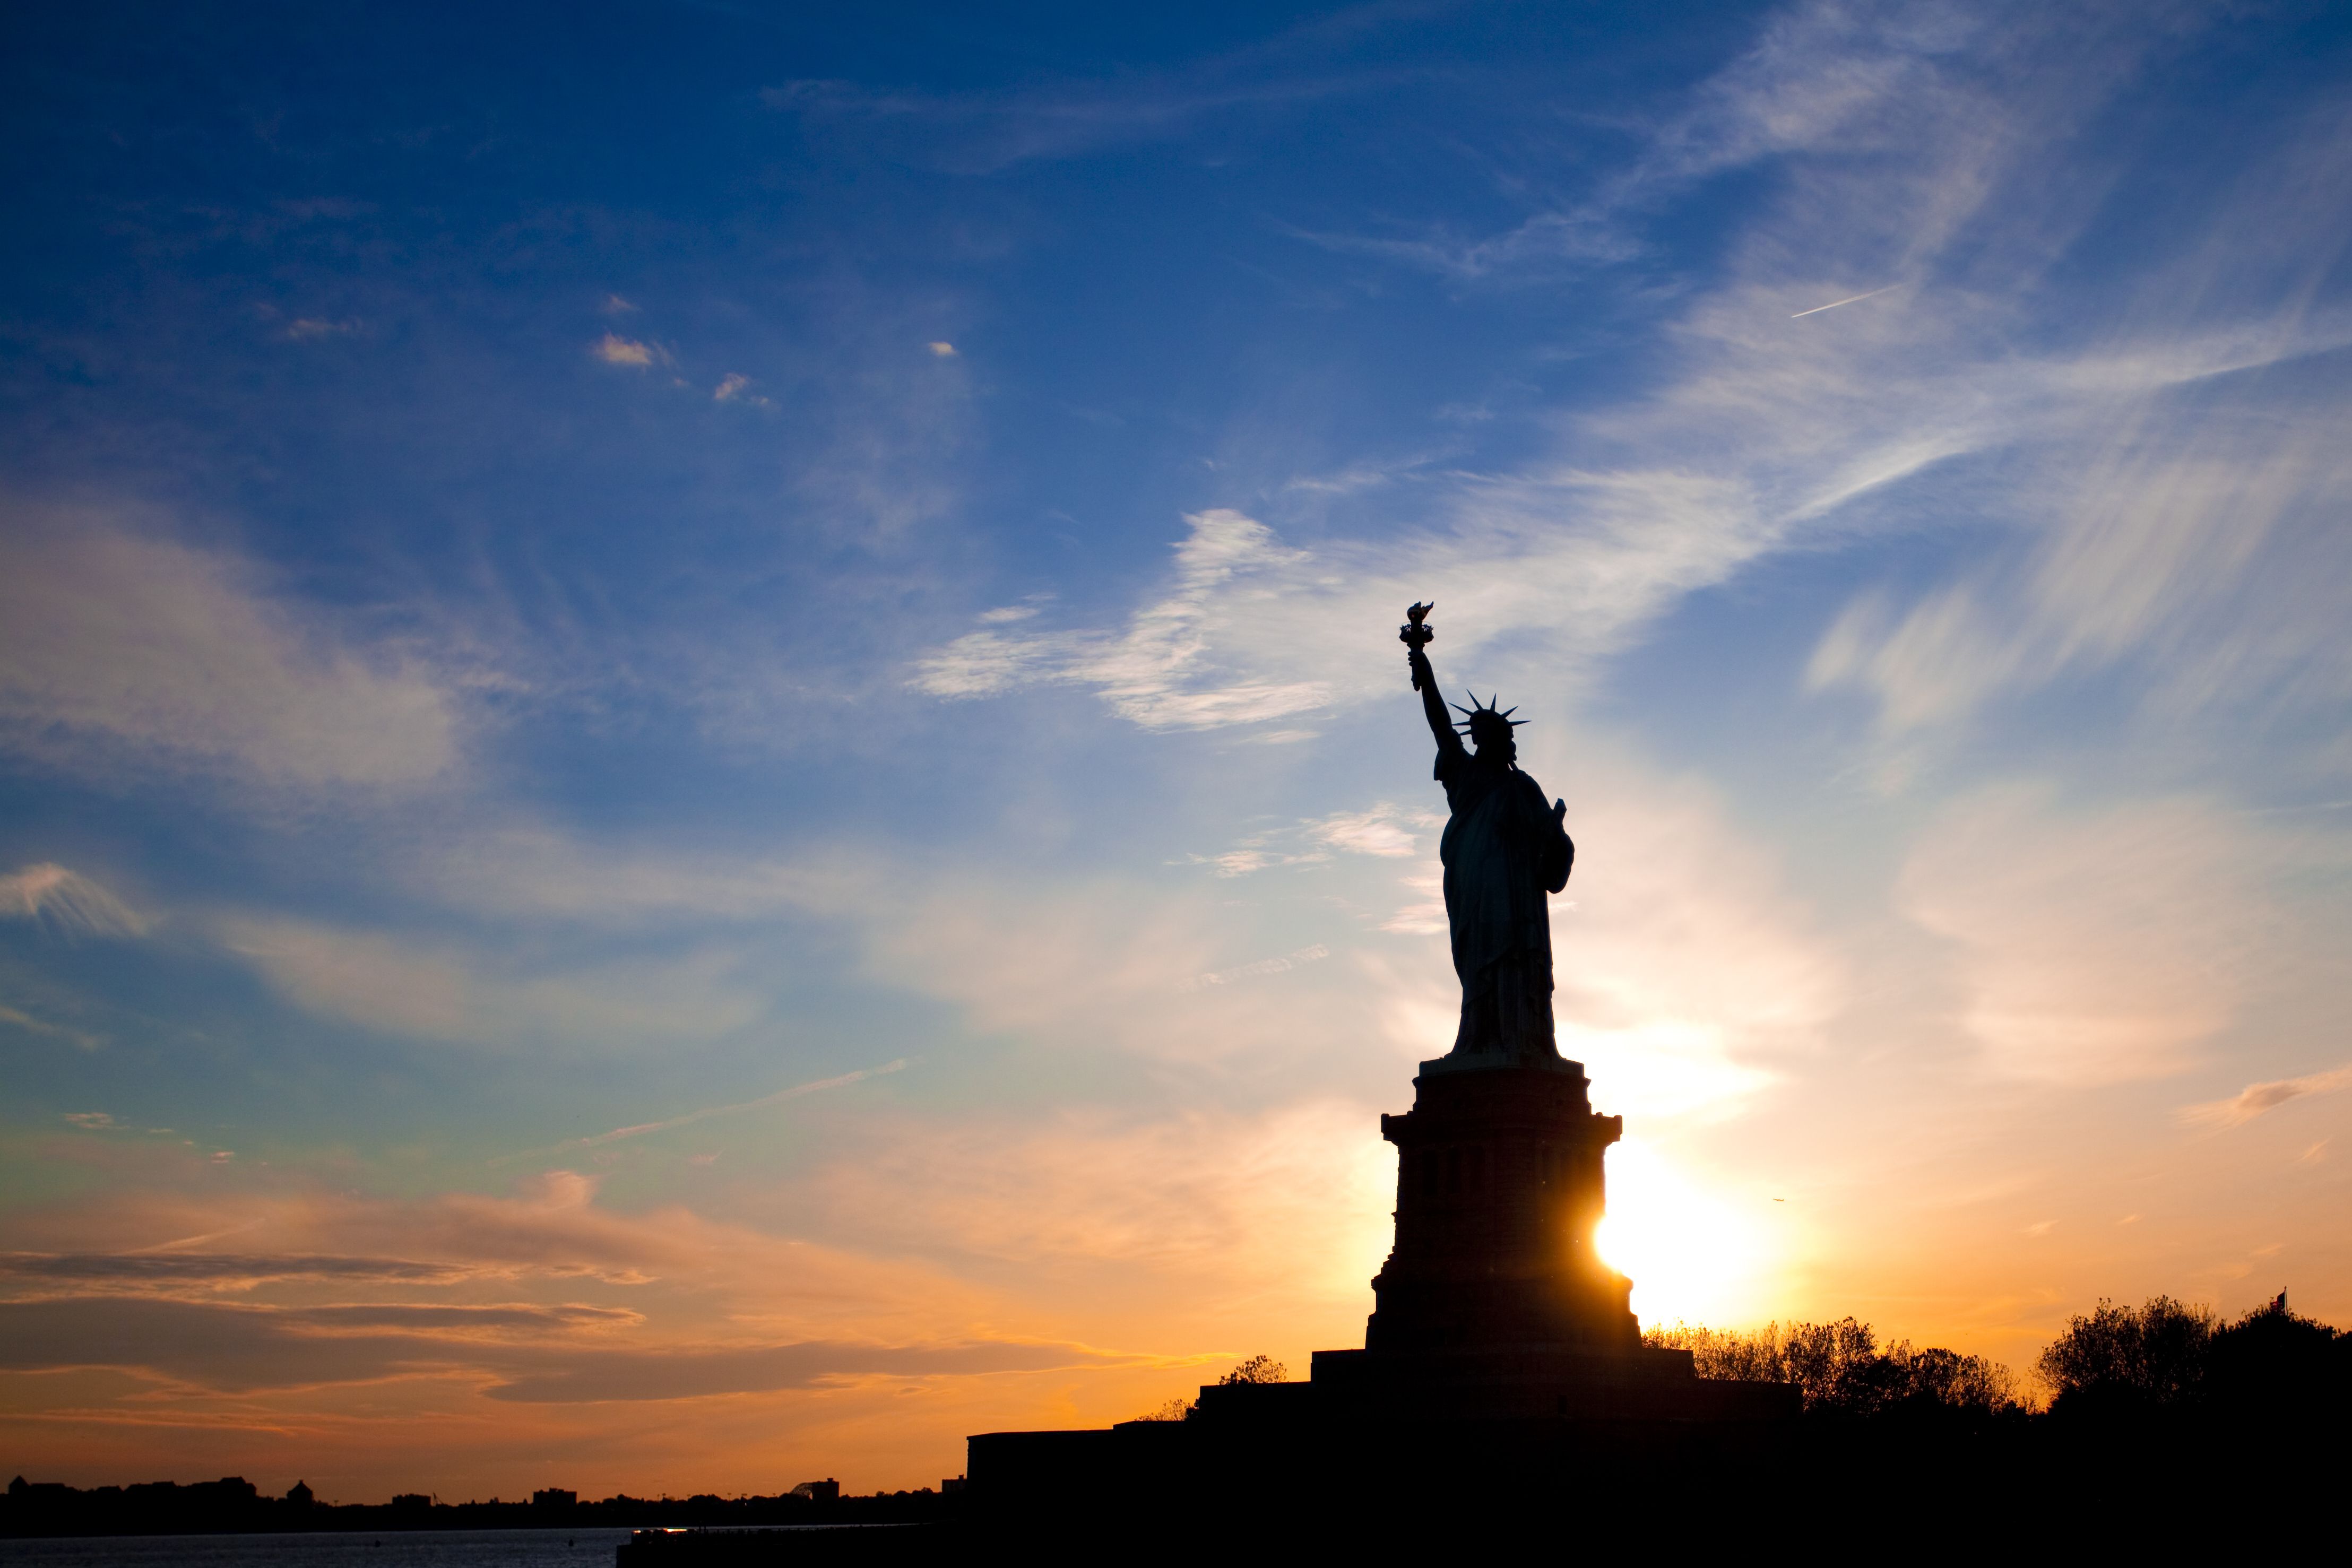 Statue of Liberty at Sunset | Photography | Pinterest | Liberty and ...